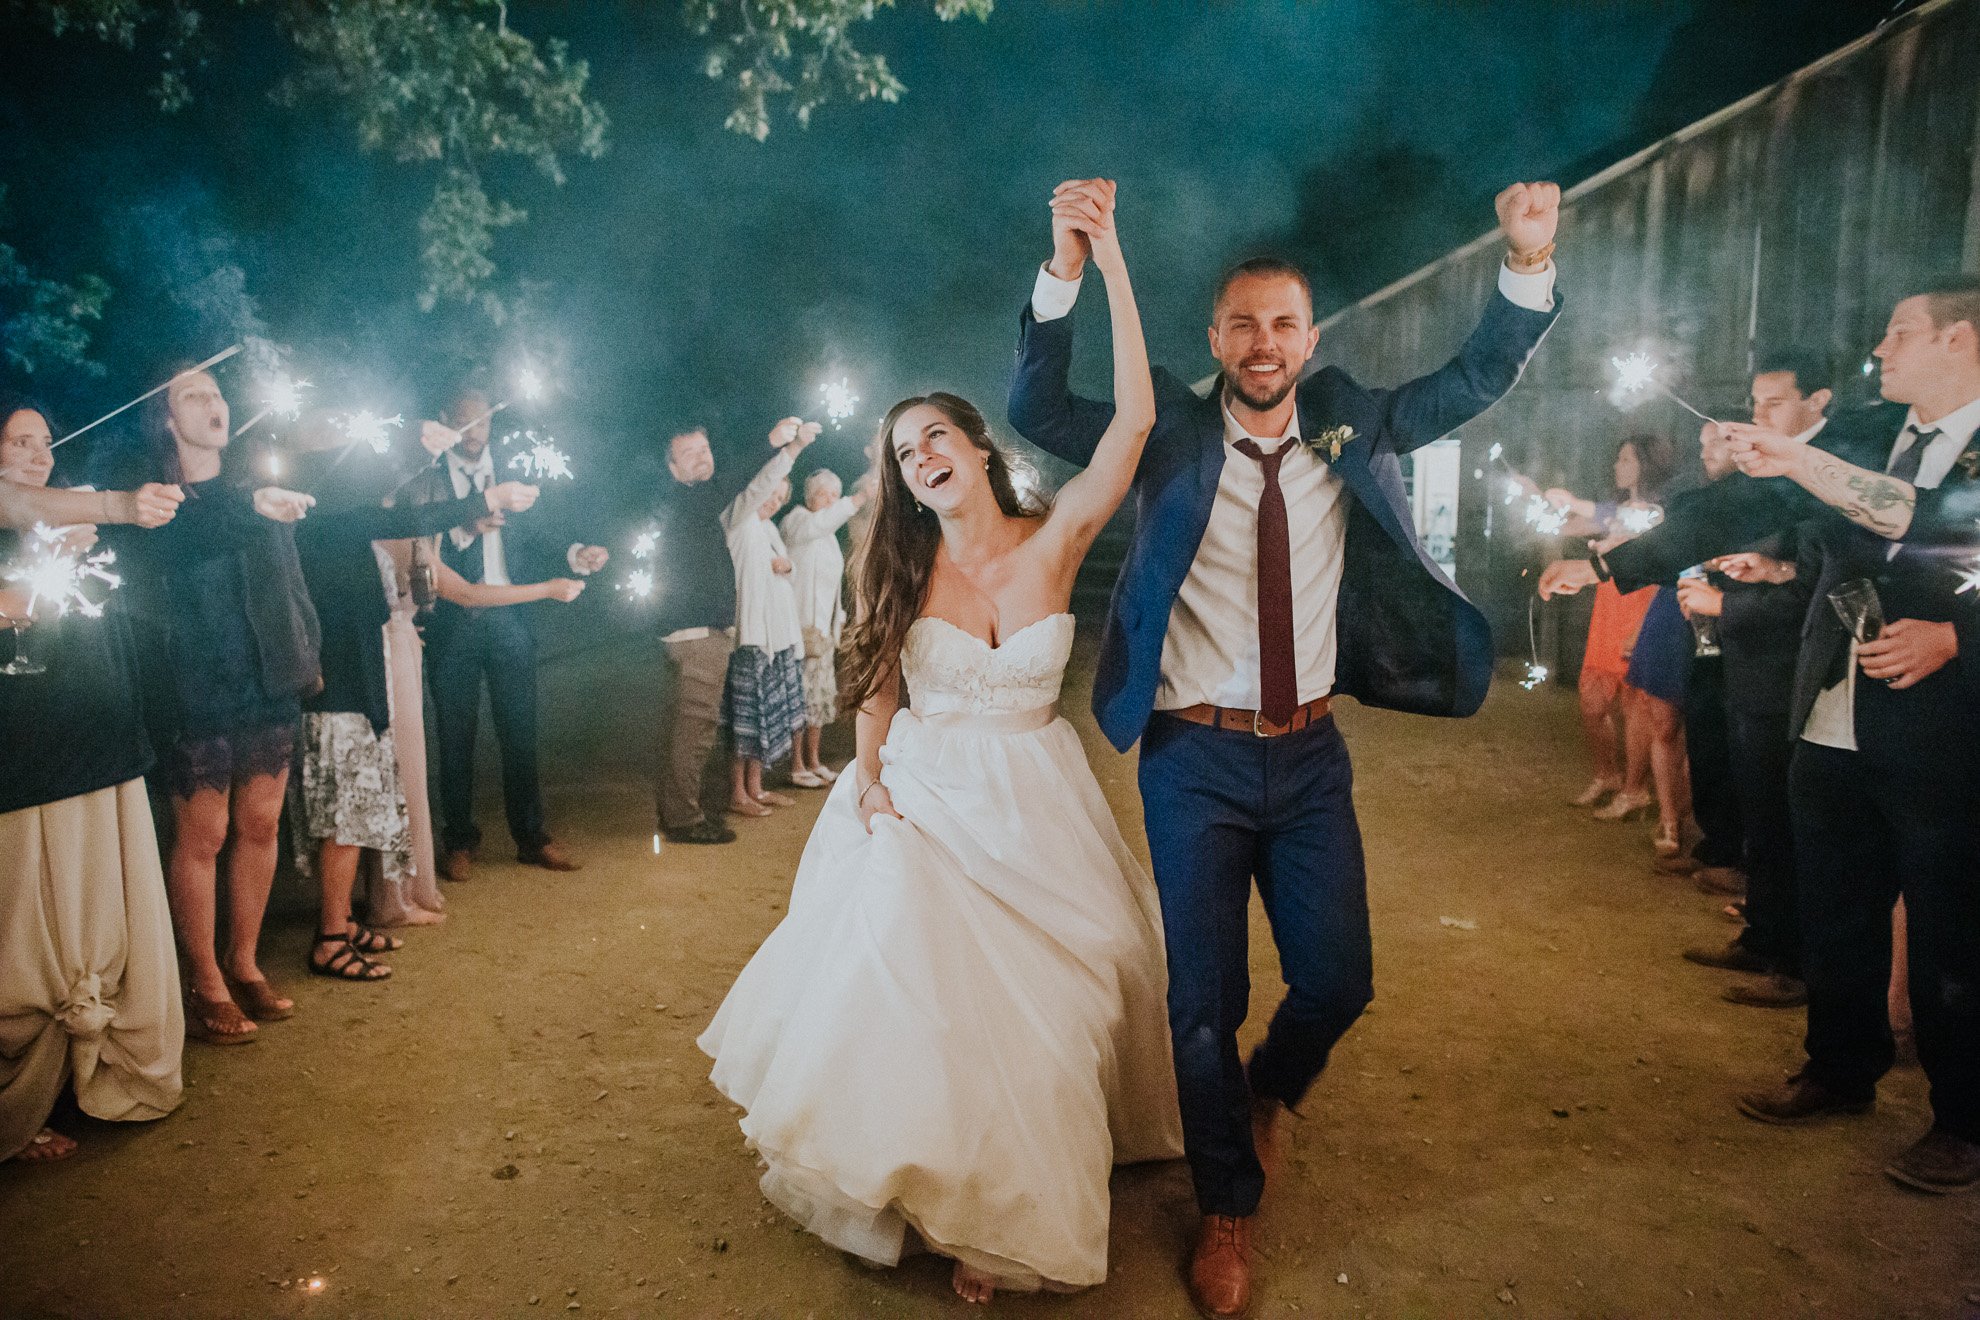 Ian and Katie LeBeau's La Cuesta Ranch wedding by Michael Stephens Photography.